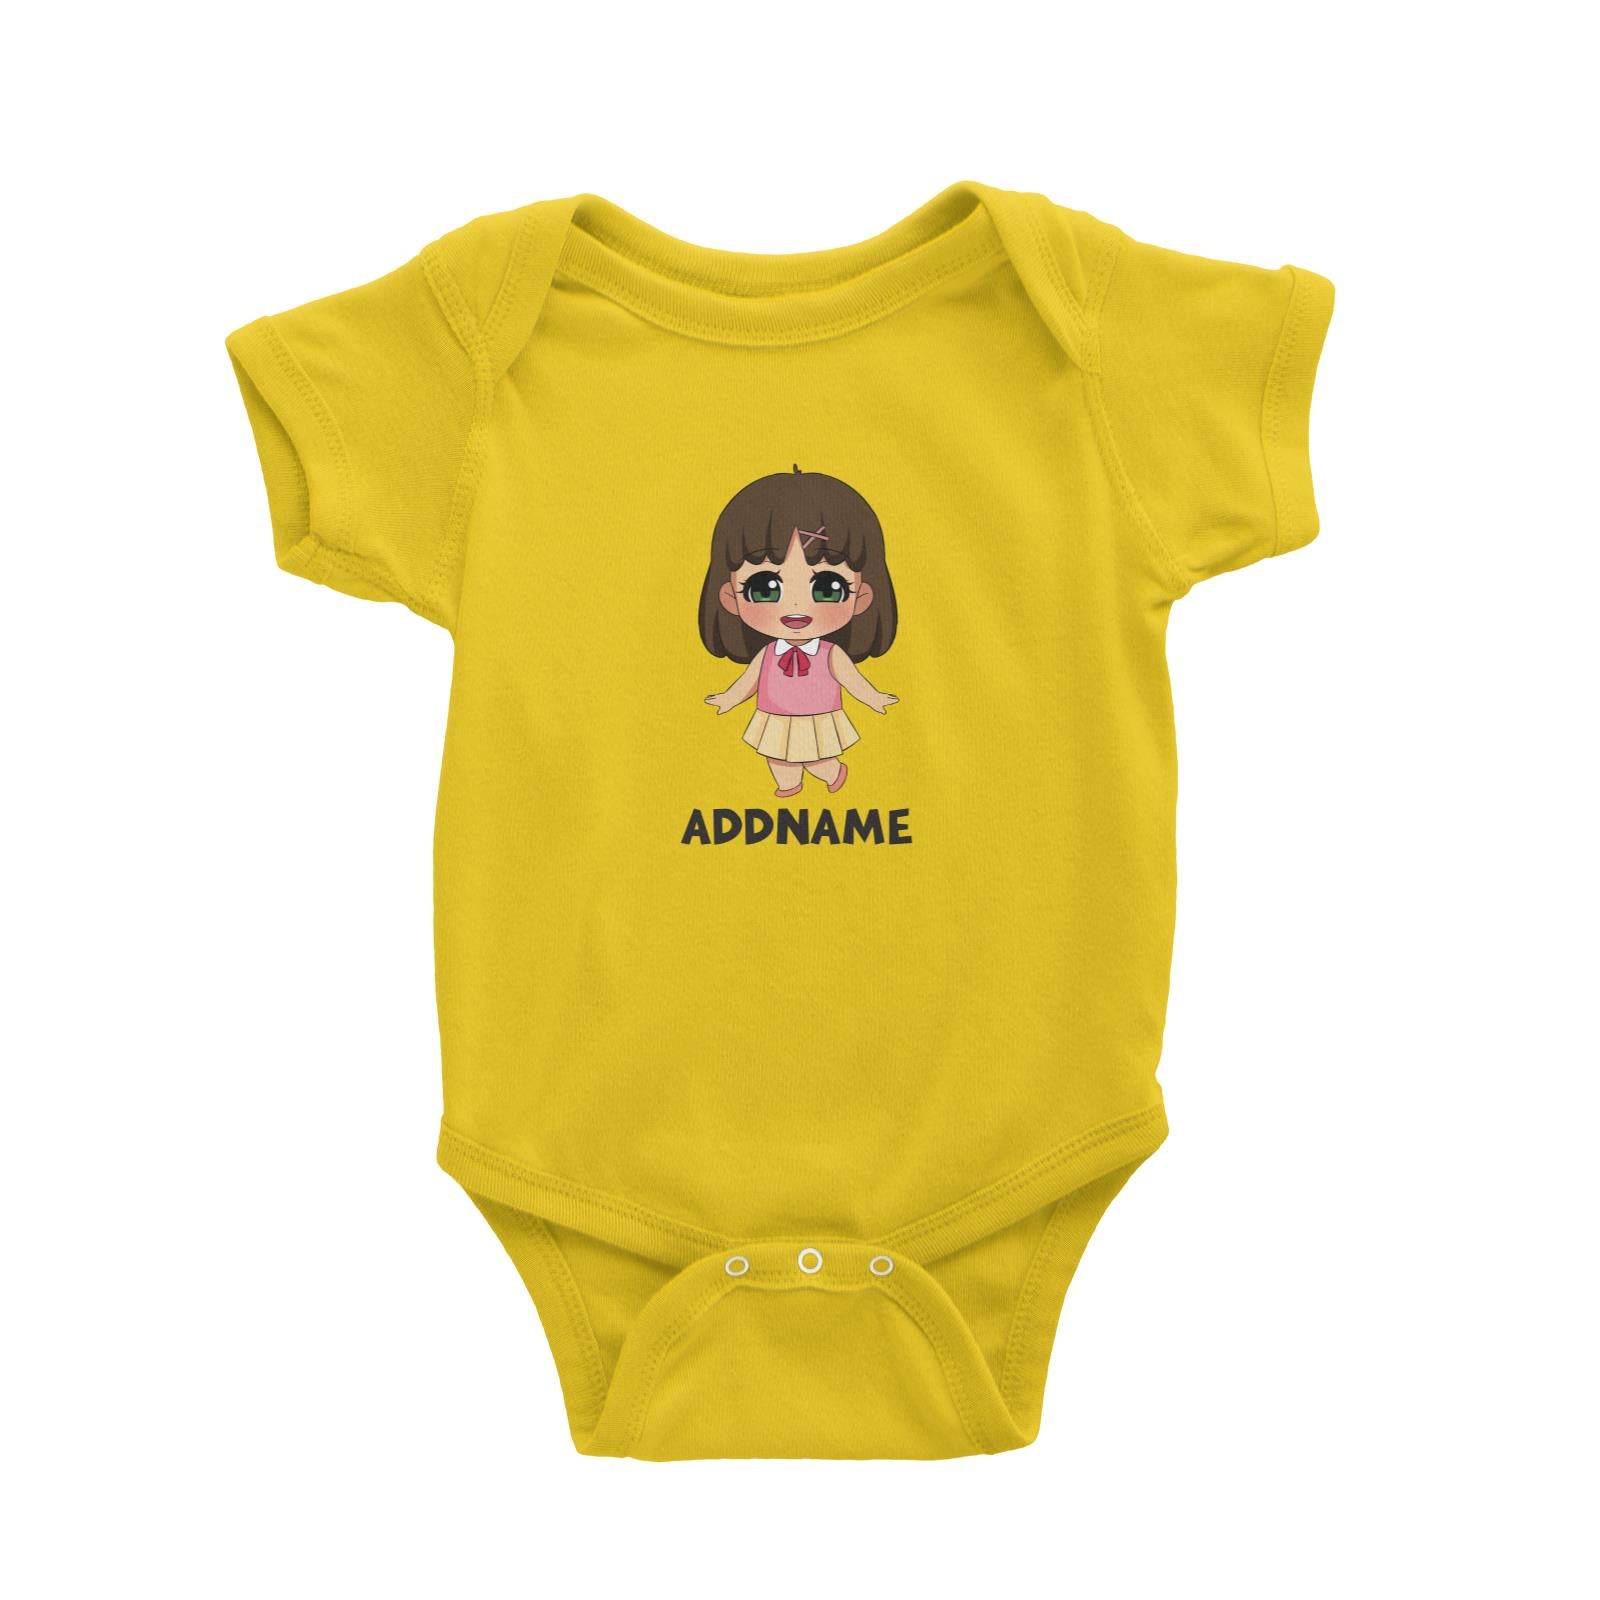 Children's Day Gift Series Little Chinese Girl Addname Baby Romper